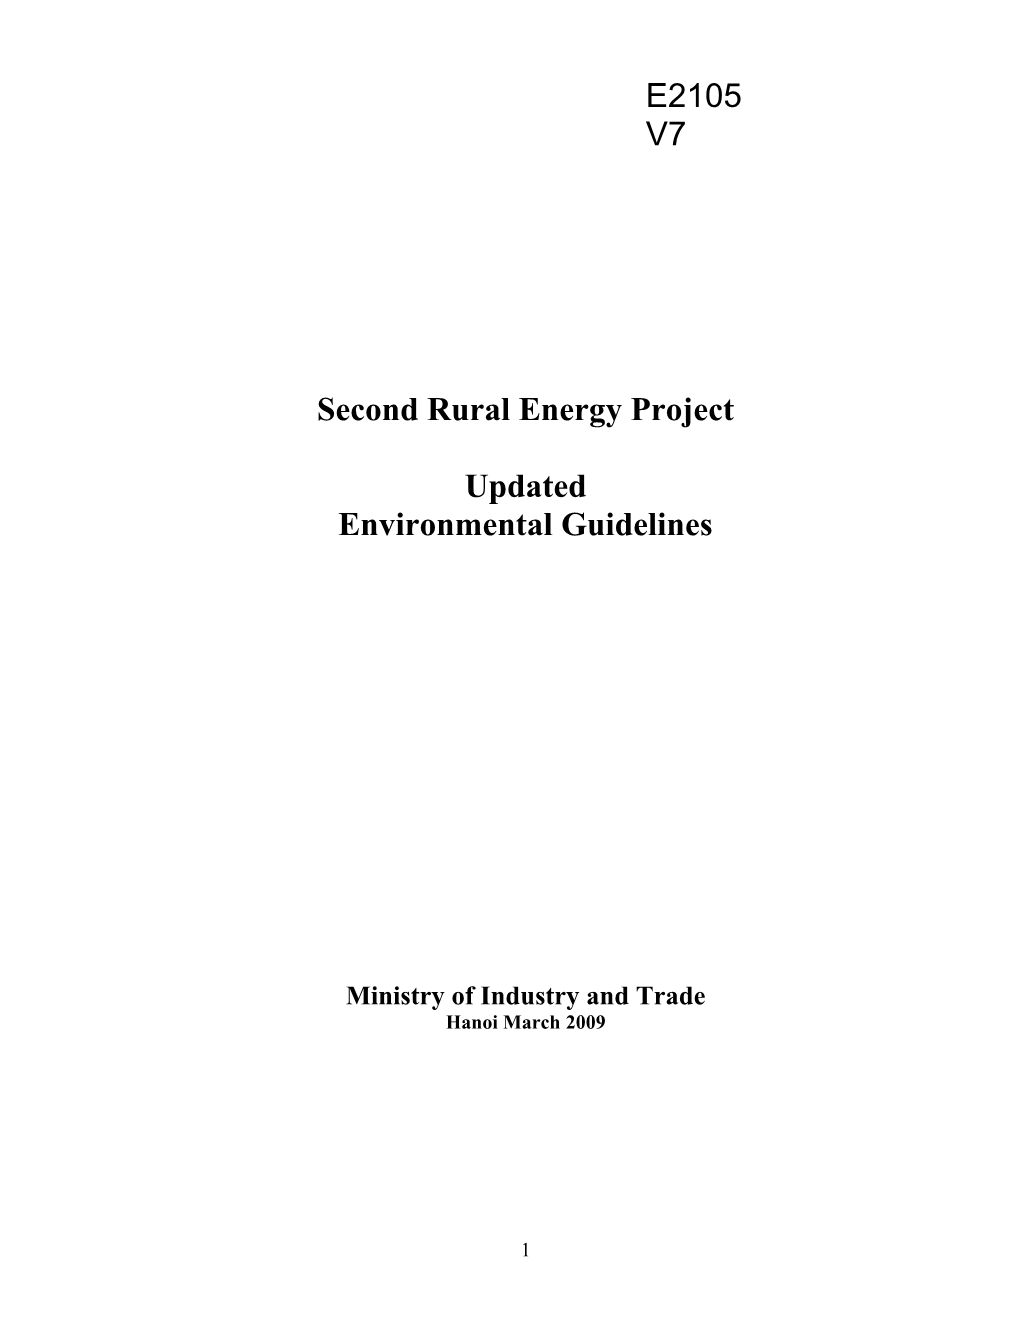 Additional Annex 15: Environmental Guidelines and Framework